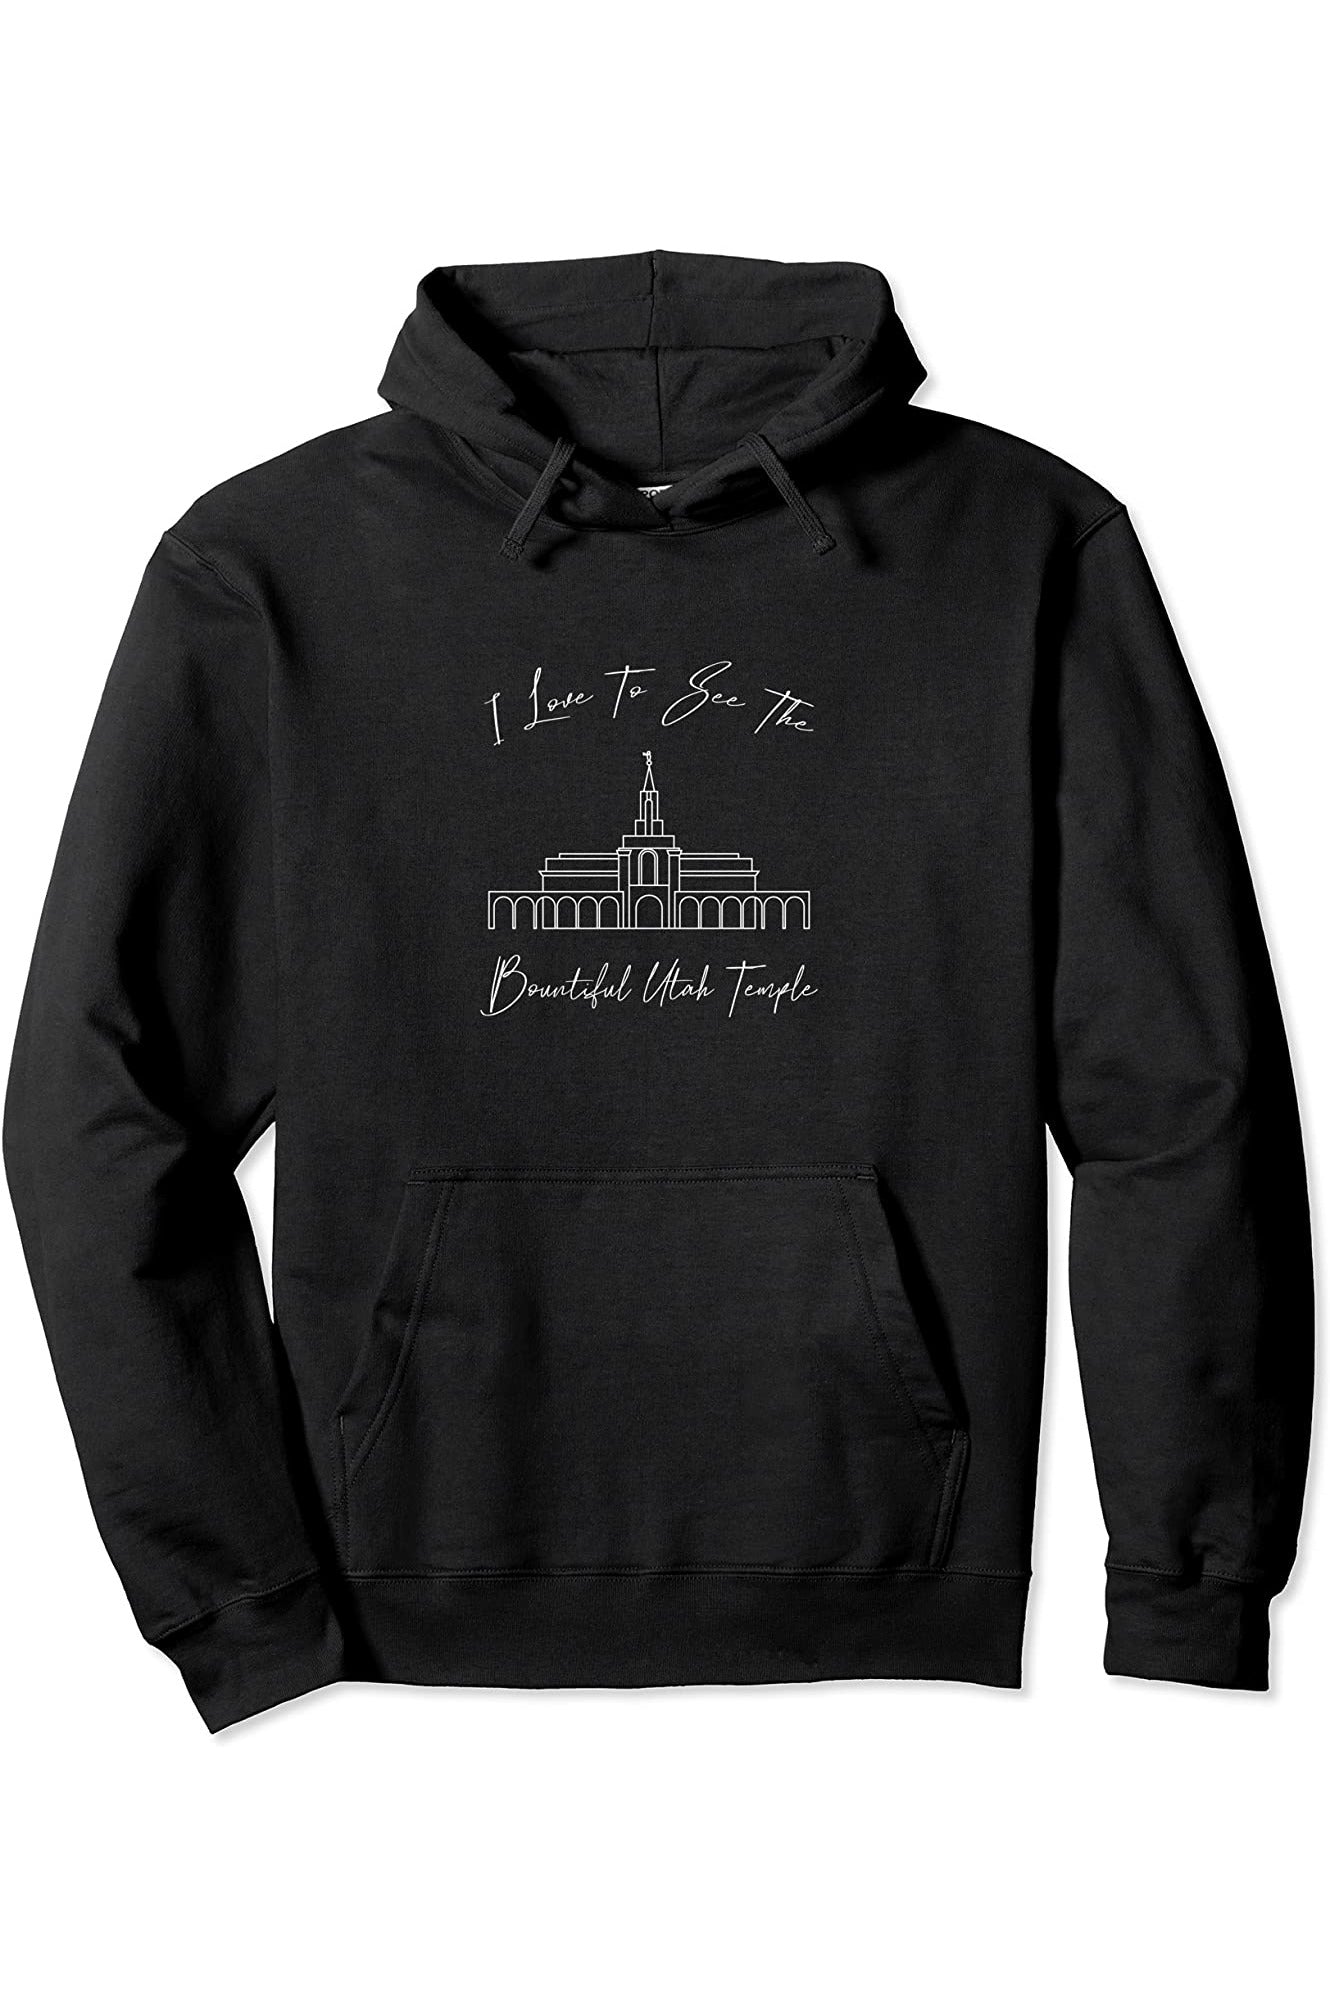 Bountiful Utah Temple Pullover Hoodie - Calligraphy Style (English) US